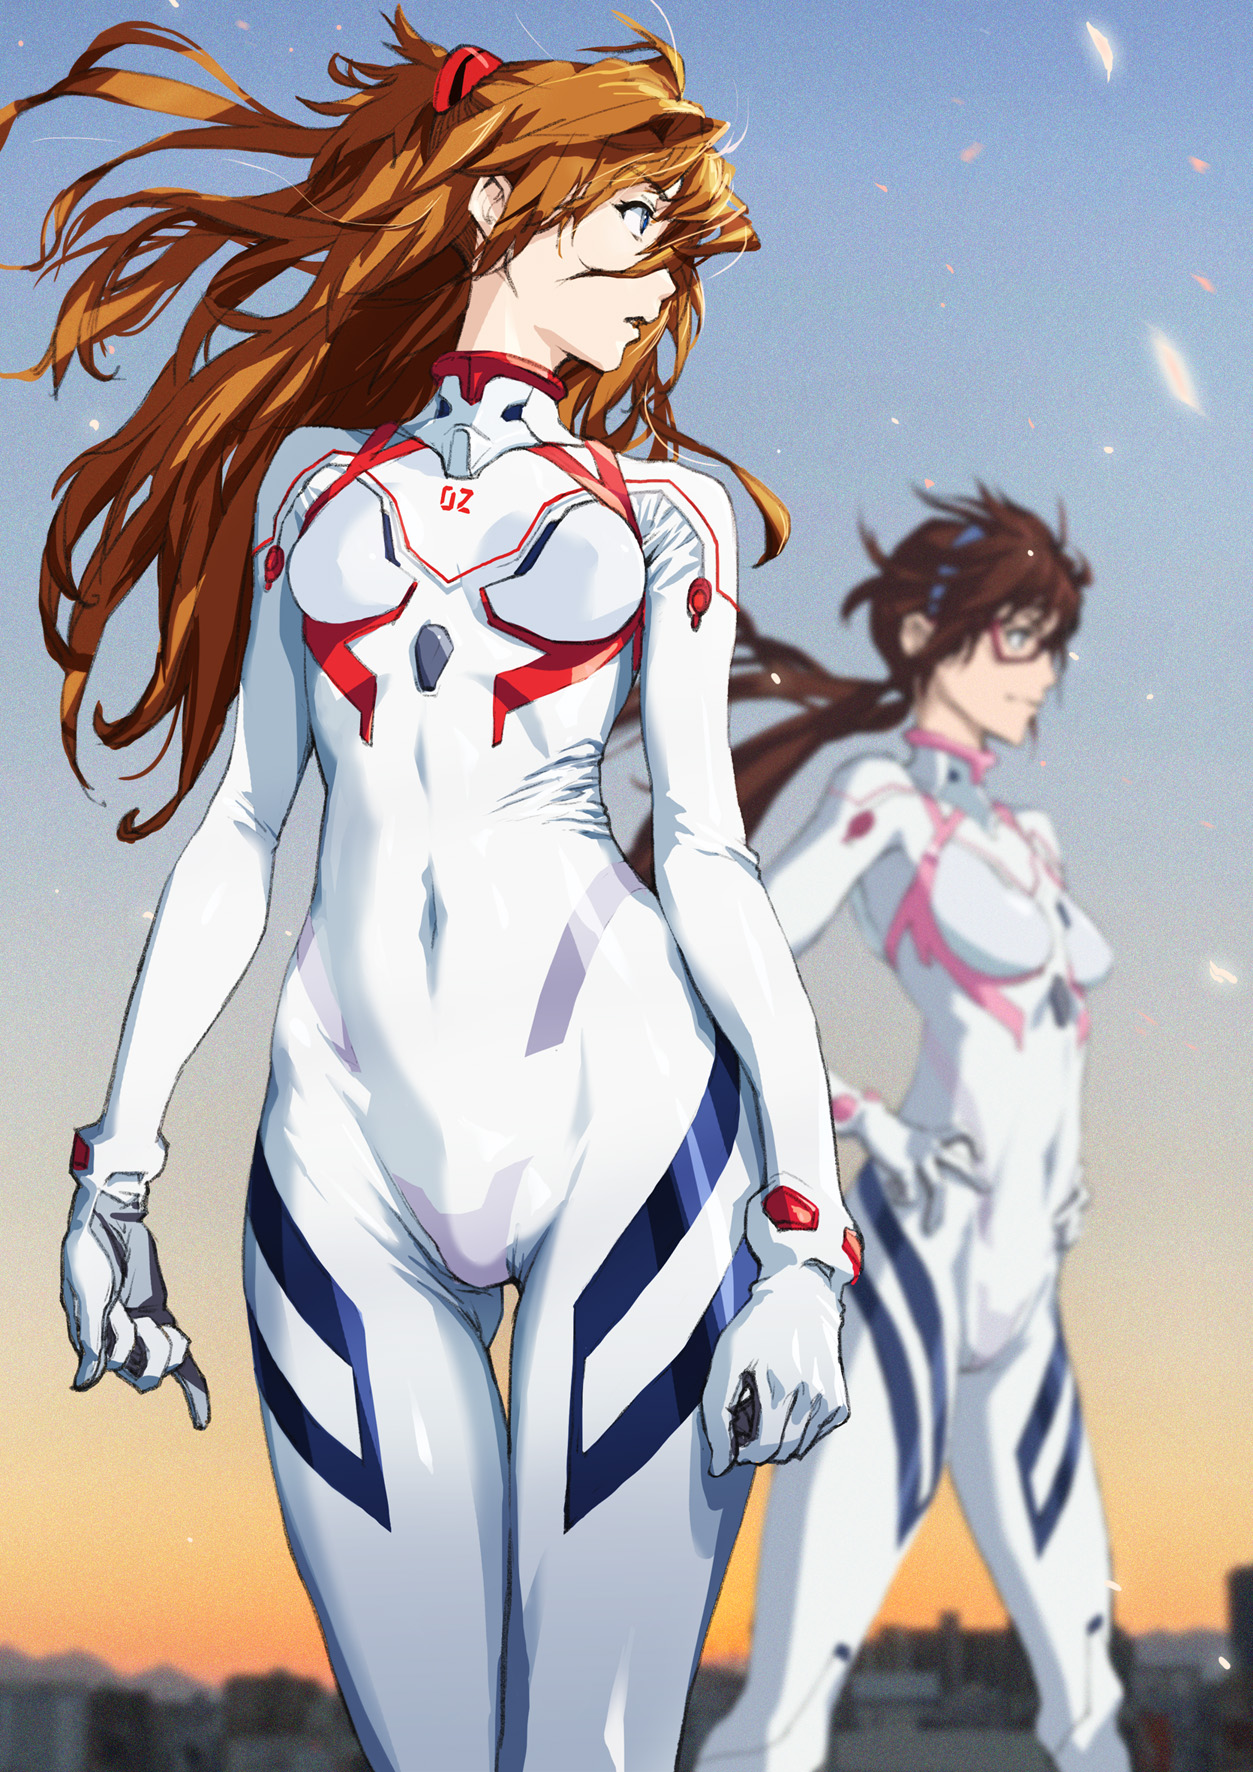 Anime 1253x1772 anime anime girls Neon Genesis Evangelion portrait display Asuka Langley Soryu Makinami Mari Illustrious thighs plugsuit small boobs the gap twintails 2D redhead brunette long hair bangs hair in face blue eyes parted lips women with glasses fan art blurred hair blowing in the wind Kuroda Kiyohisa